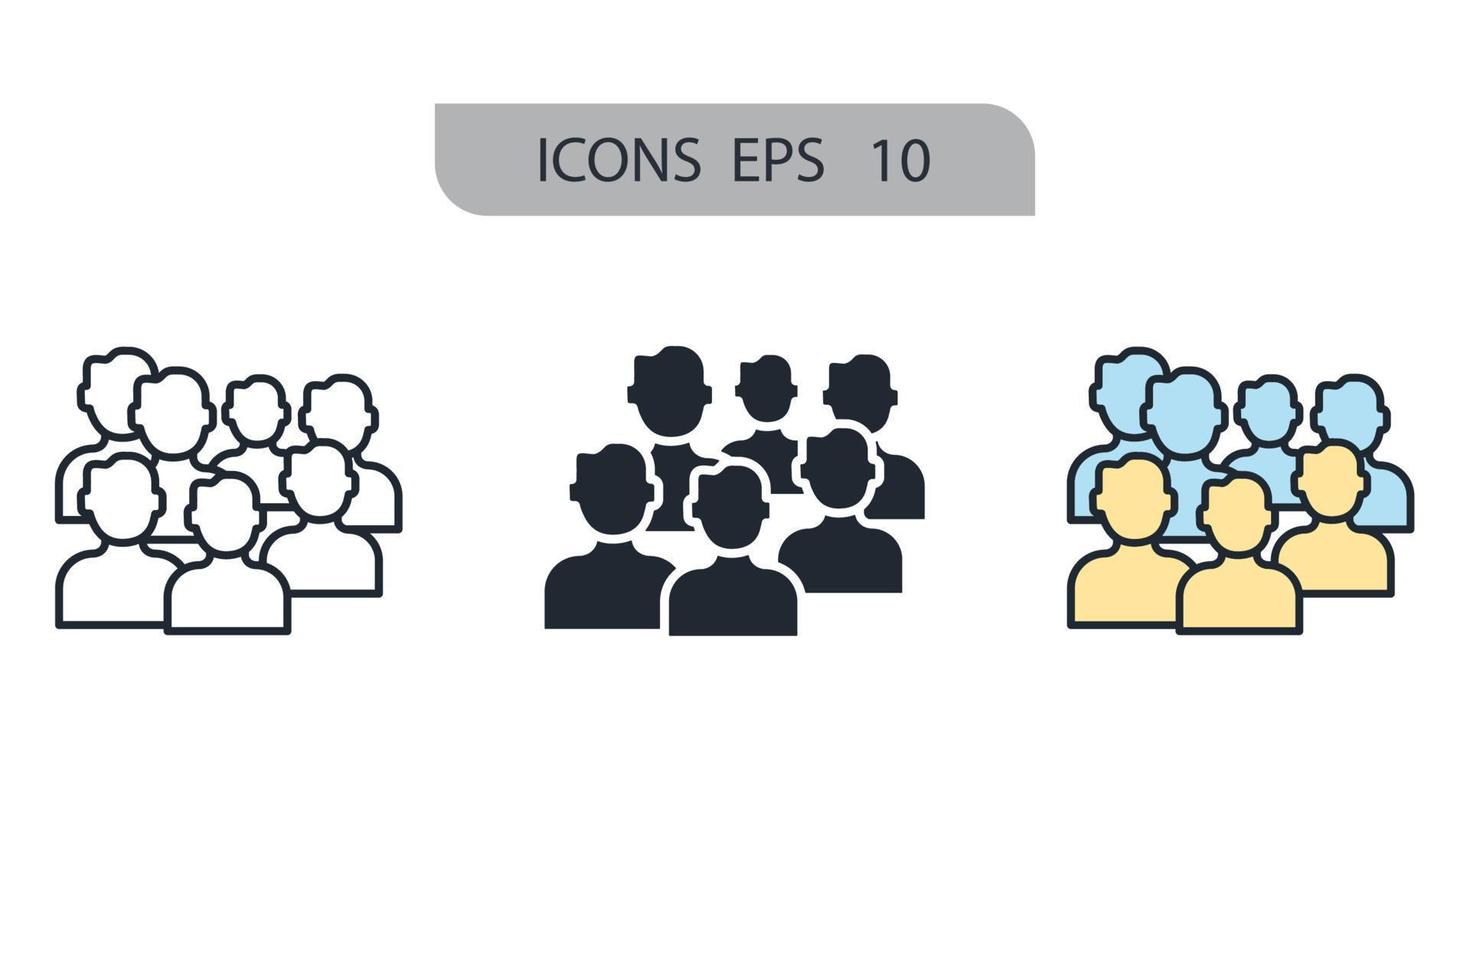 community icons symbol vector elements for infographic web